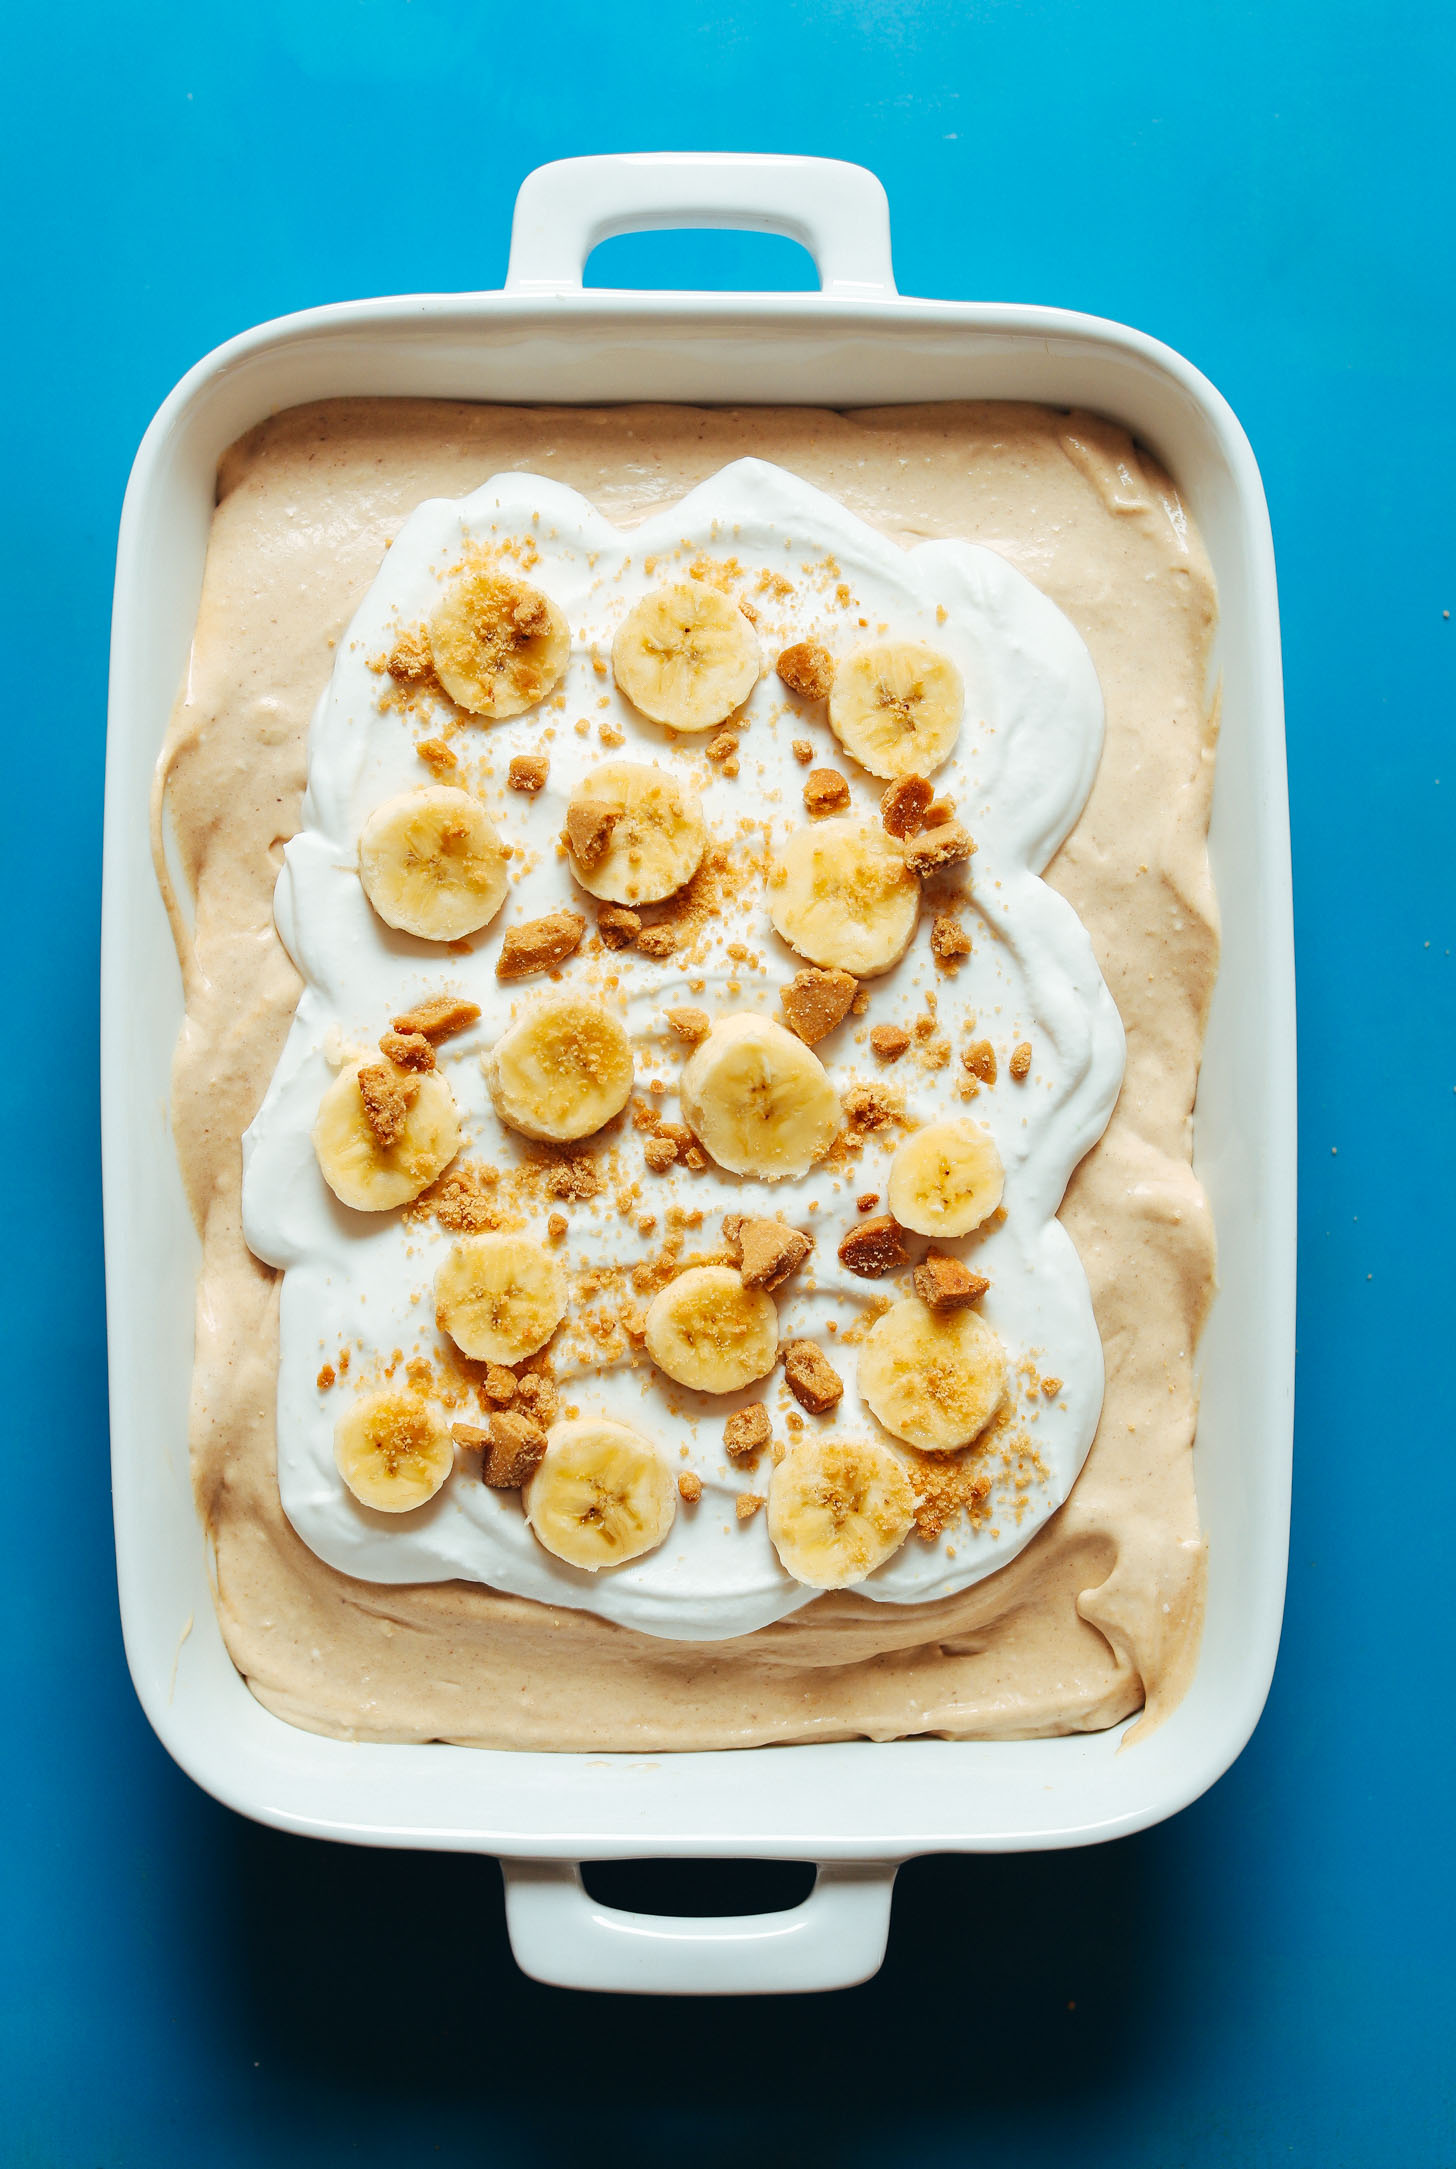 Dish filled with a batch of our incredible Vegan Gluten-Free Peanut Butter Banana Pudding